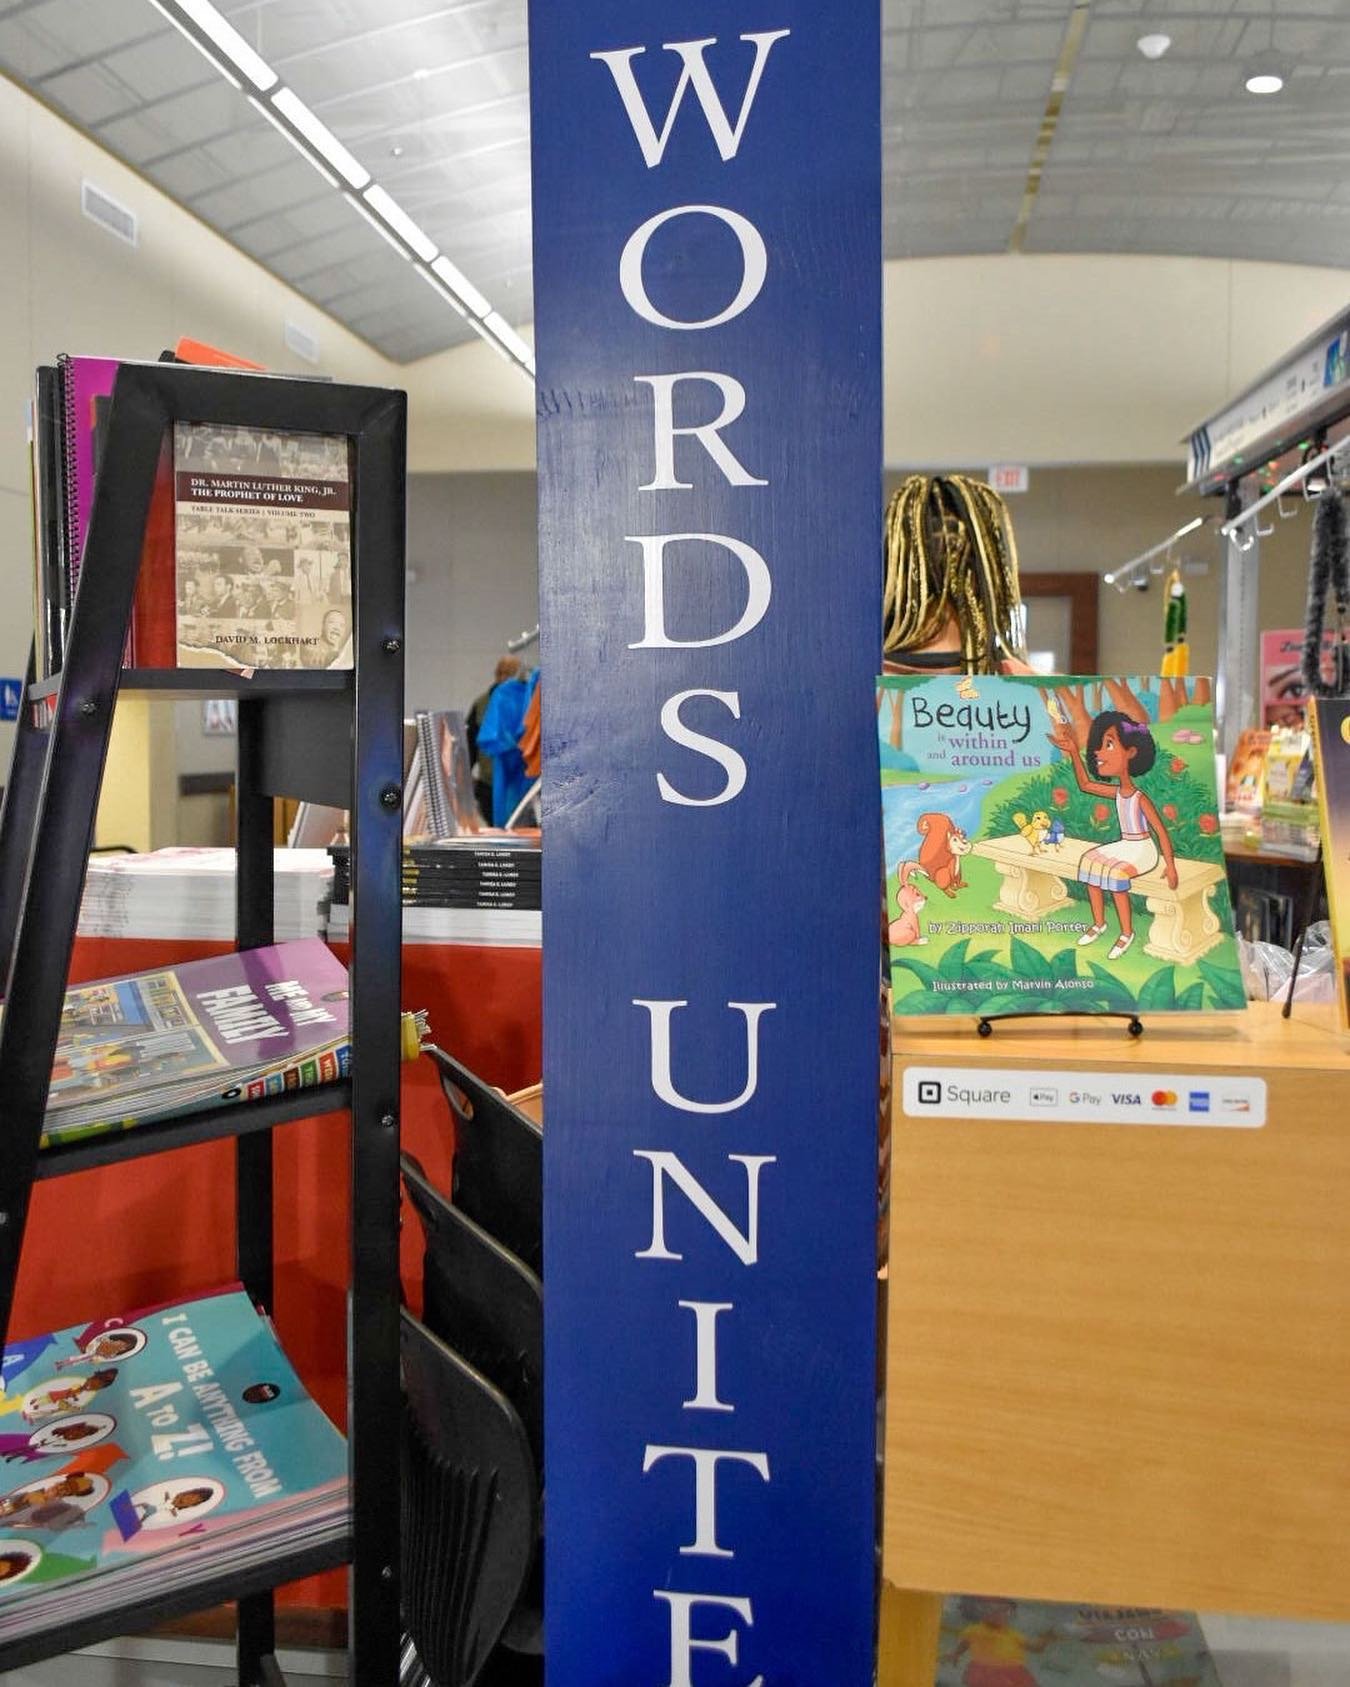 📚✨ Bring the whole family for a Friday spree at Words Unite! Enjoy 15% off for kids 17 and under. 

Hashtags
#WordsUnite #FamilyShopping #FridayDiscounts #YoungReaders #BookLovers #WeekendFun #FamilyTime #BookstoreDeals #DiscountAlert #KidsBooks #Pa